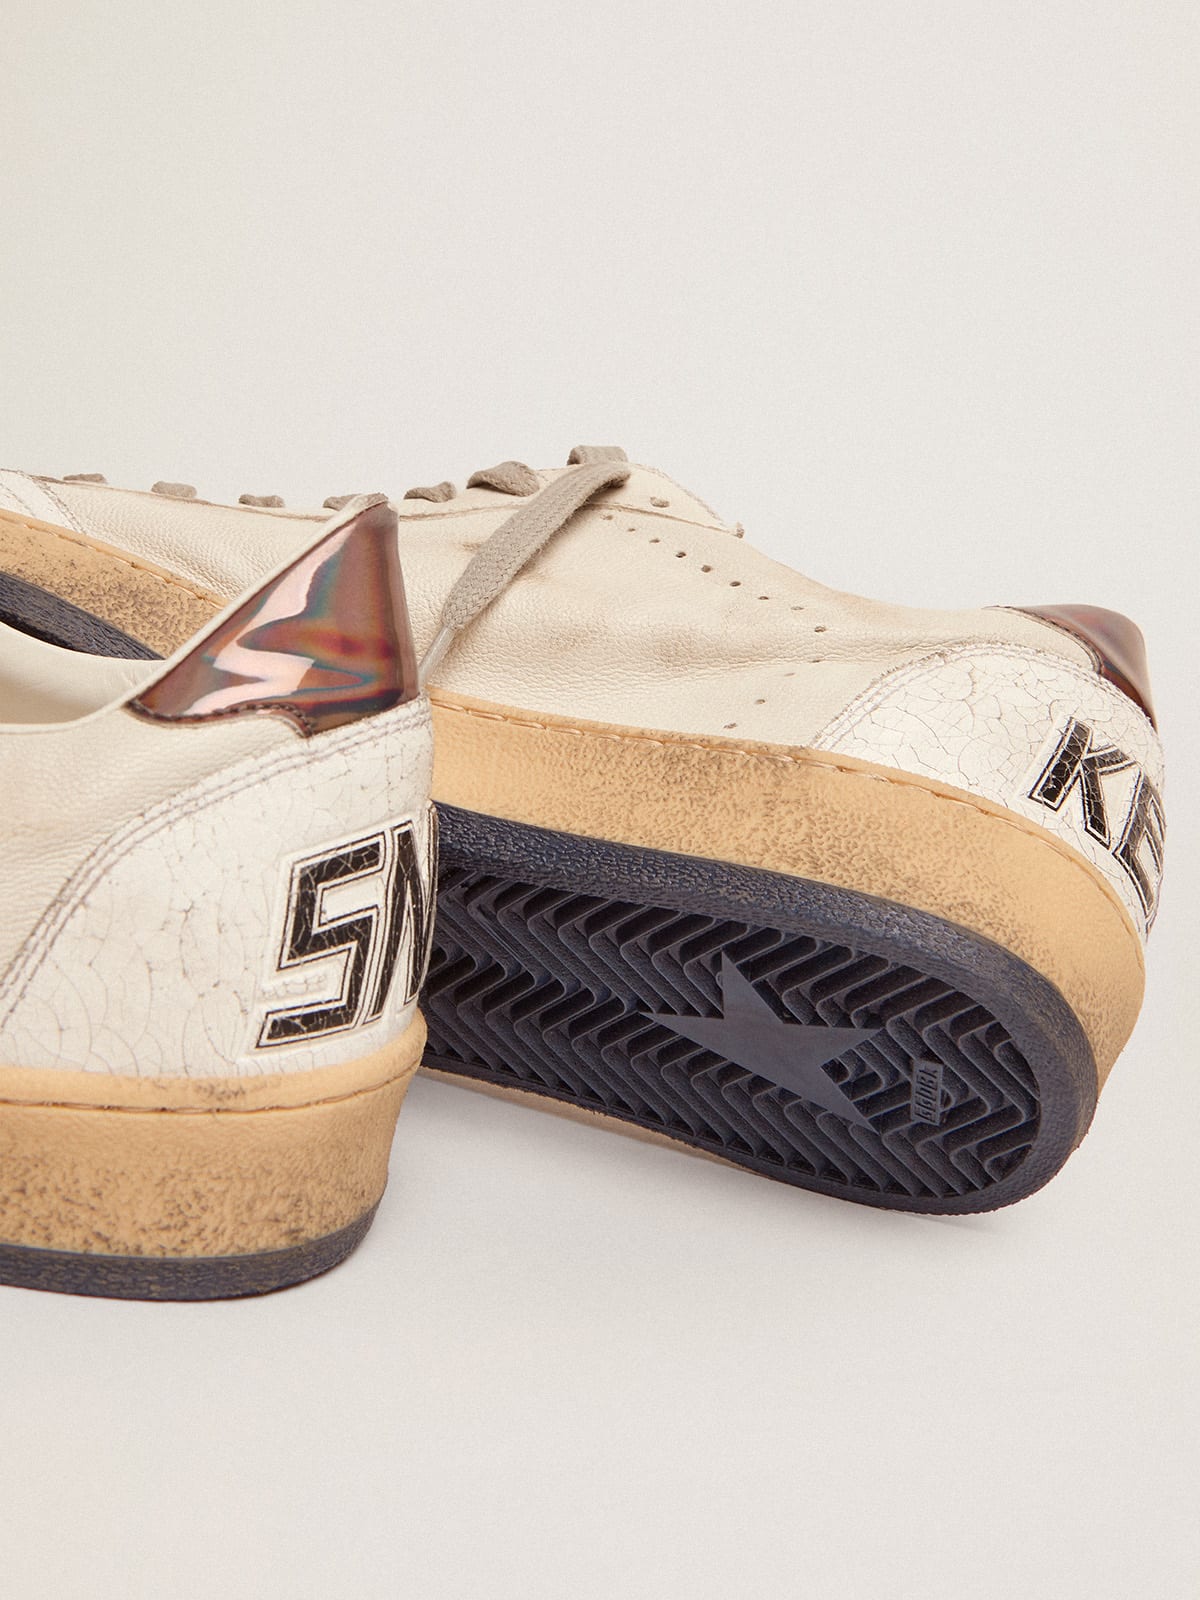 Golden Goose - Men's Ball Star in nappa with holographic inserts and sole lettering in 